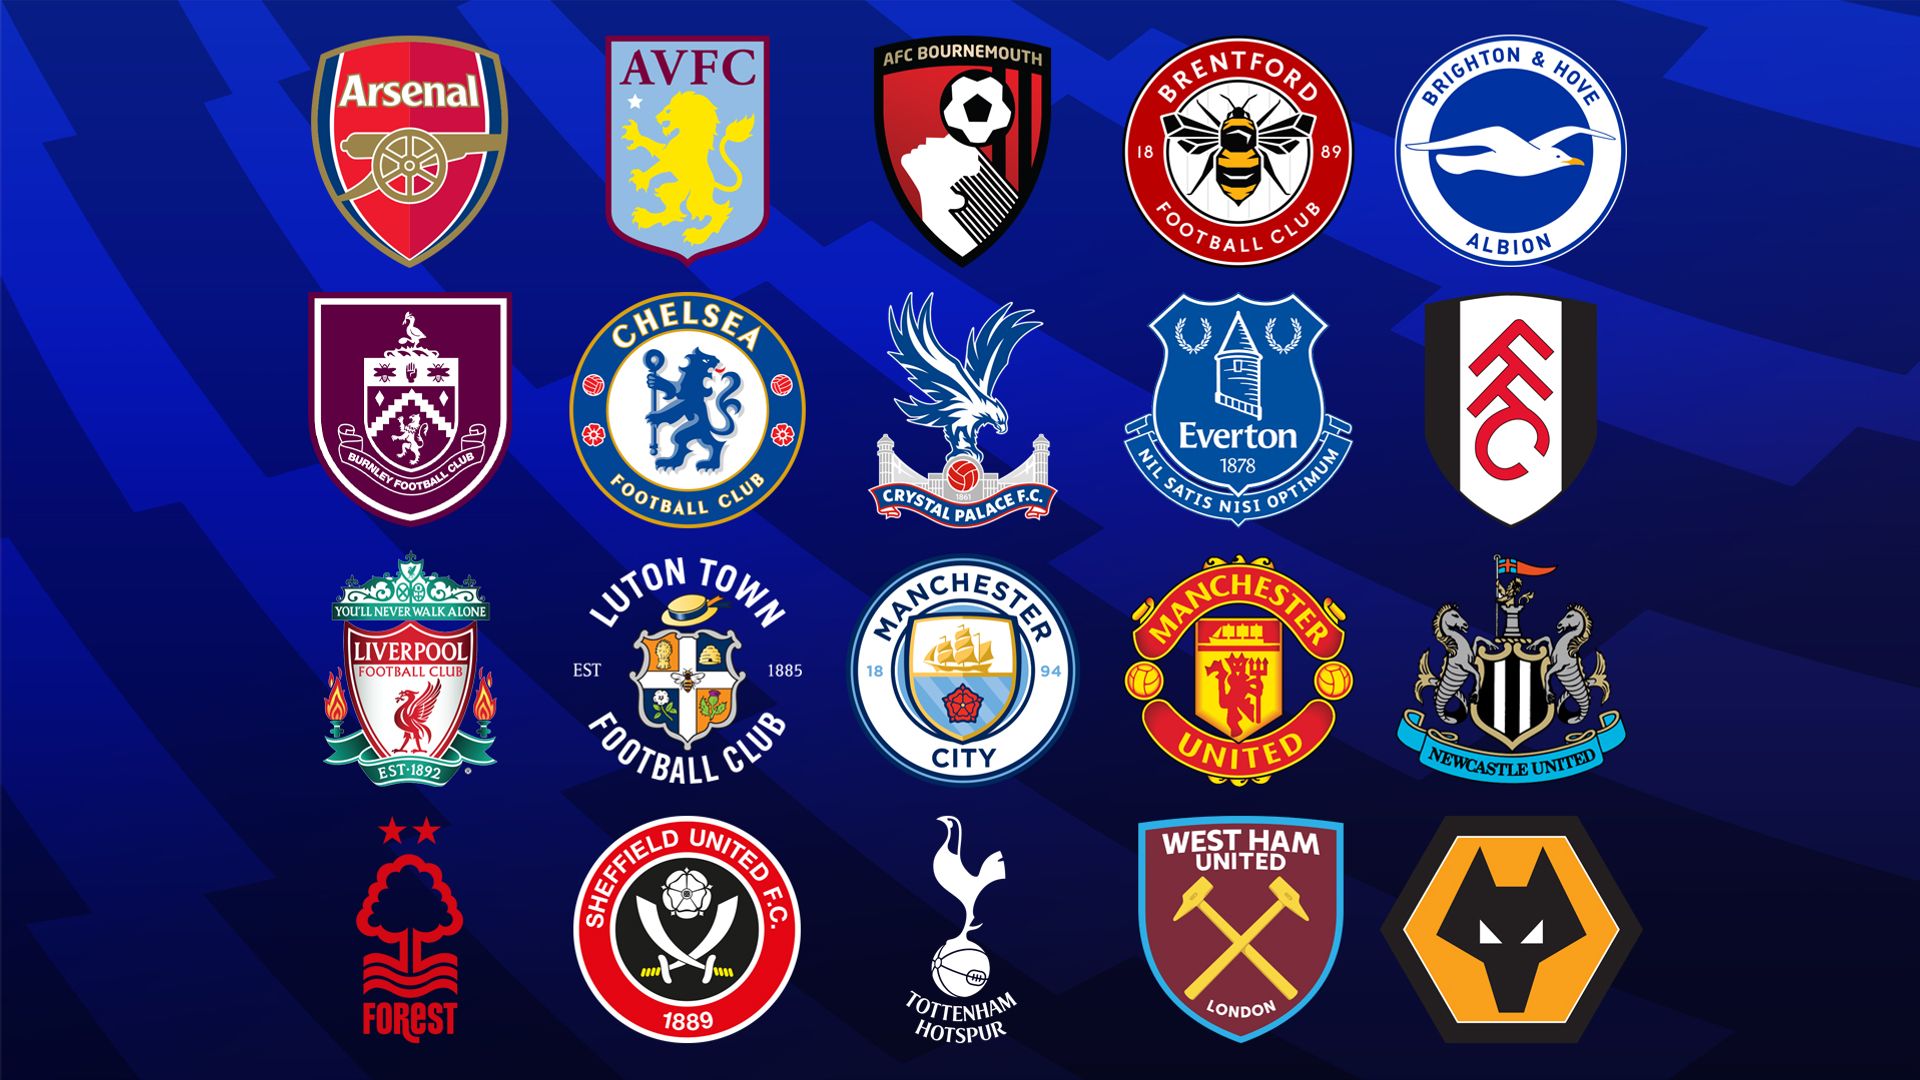 'We don't have a break now' - PL clubs' January schedule